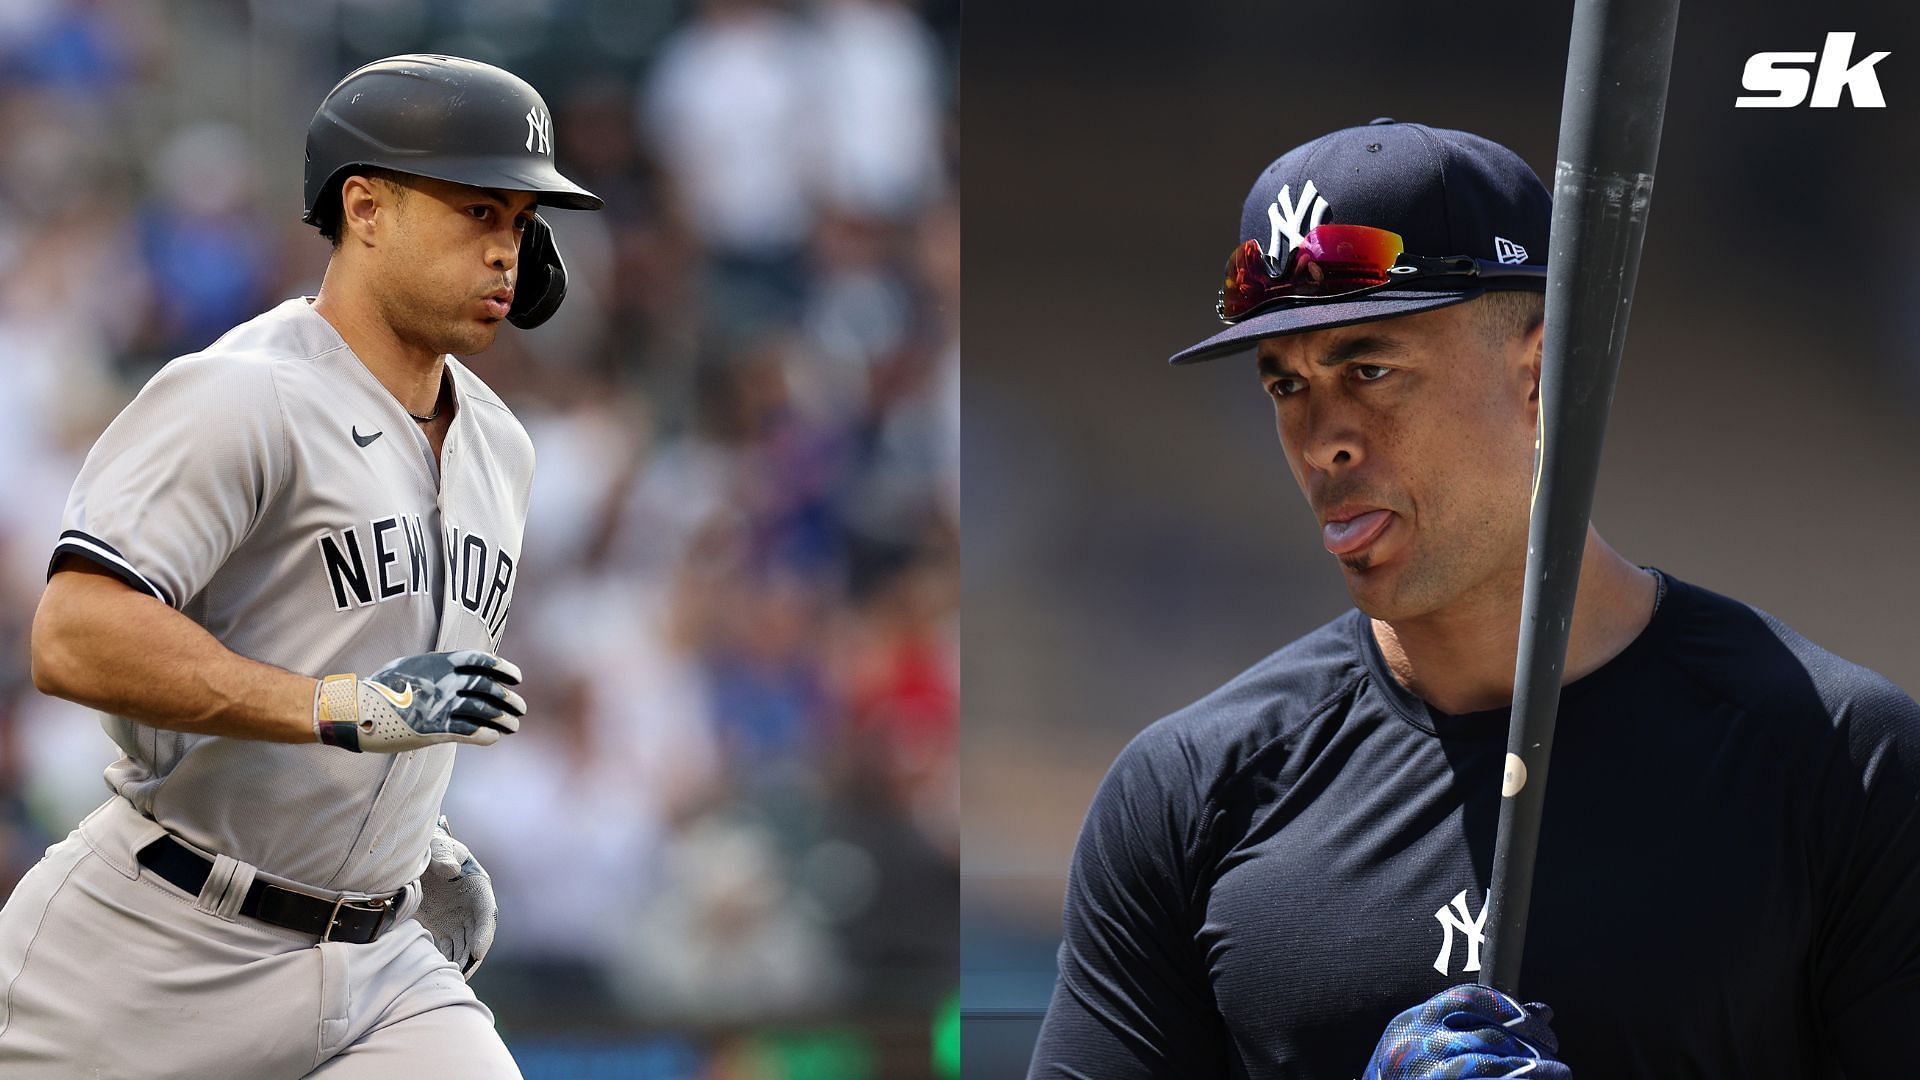 Yankees' Stanton laments recent stretch: 'I didn't do my part